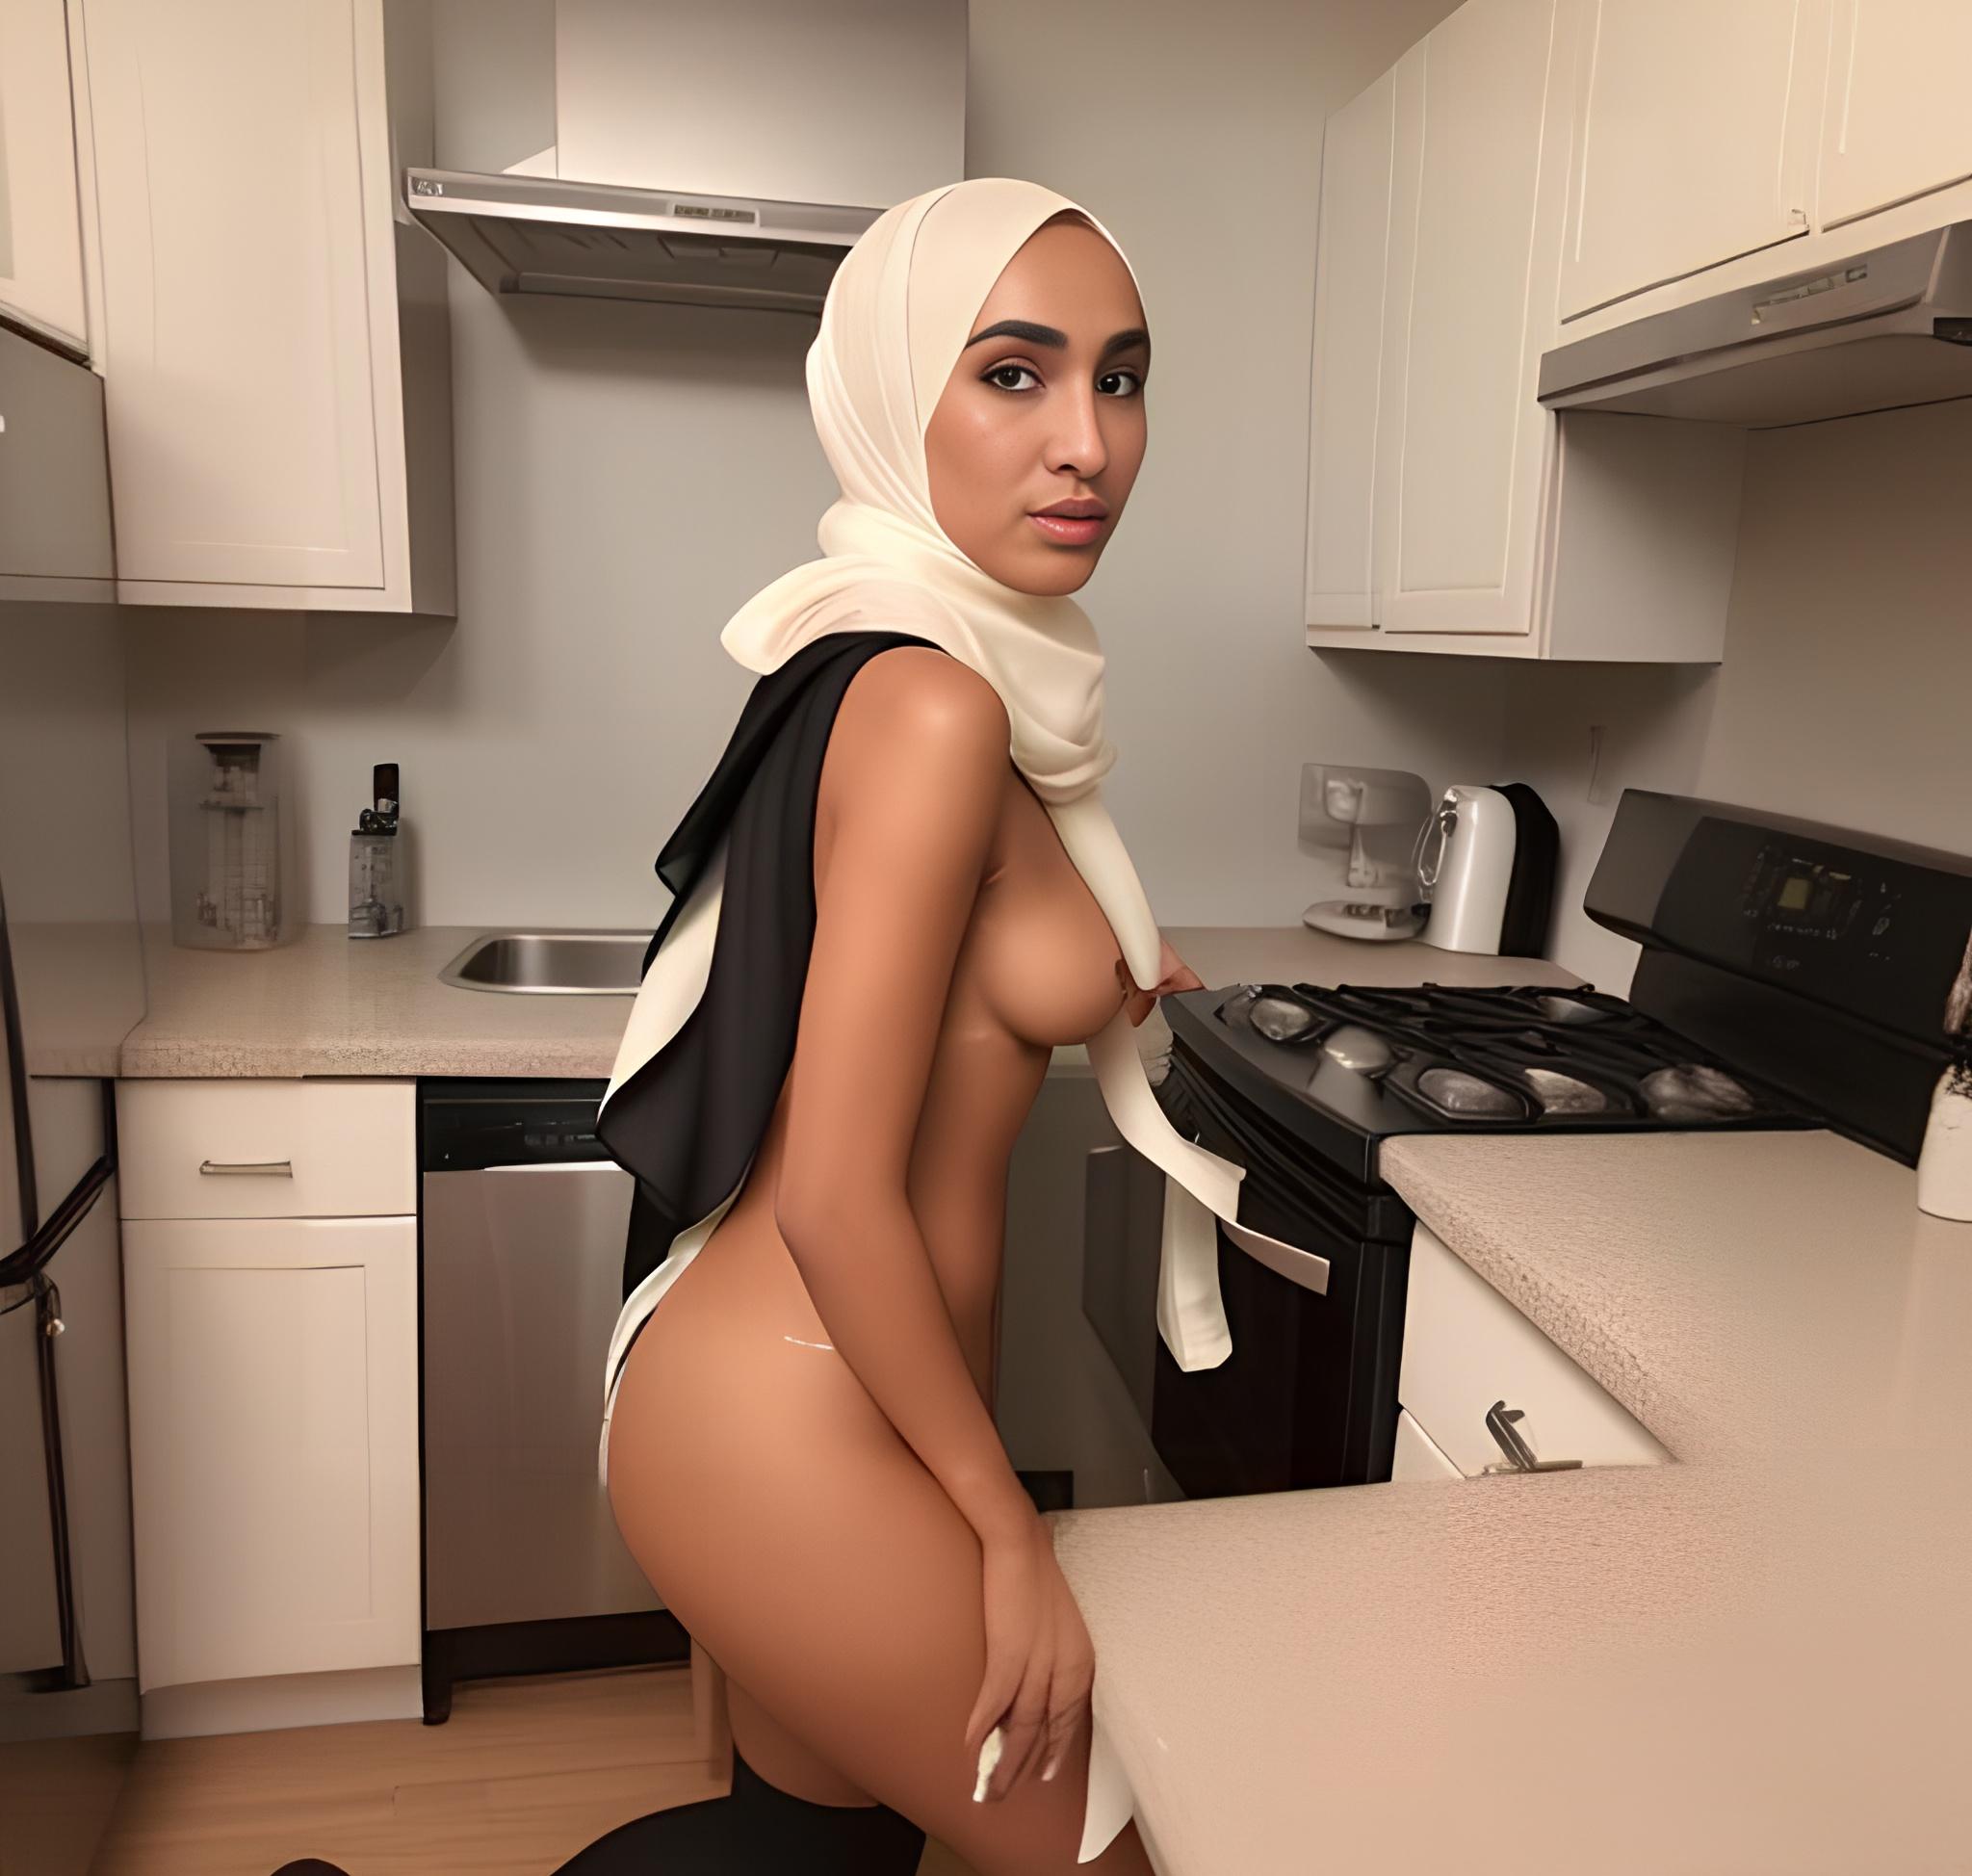 Tanned Skin Teen in Hijab Kitchen A Miss Universe Model with Perfect Body and Small Tits picture